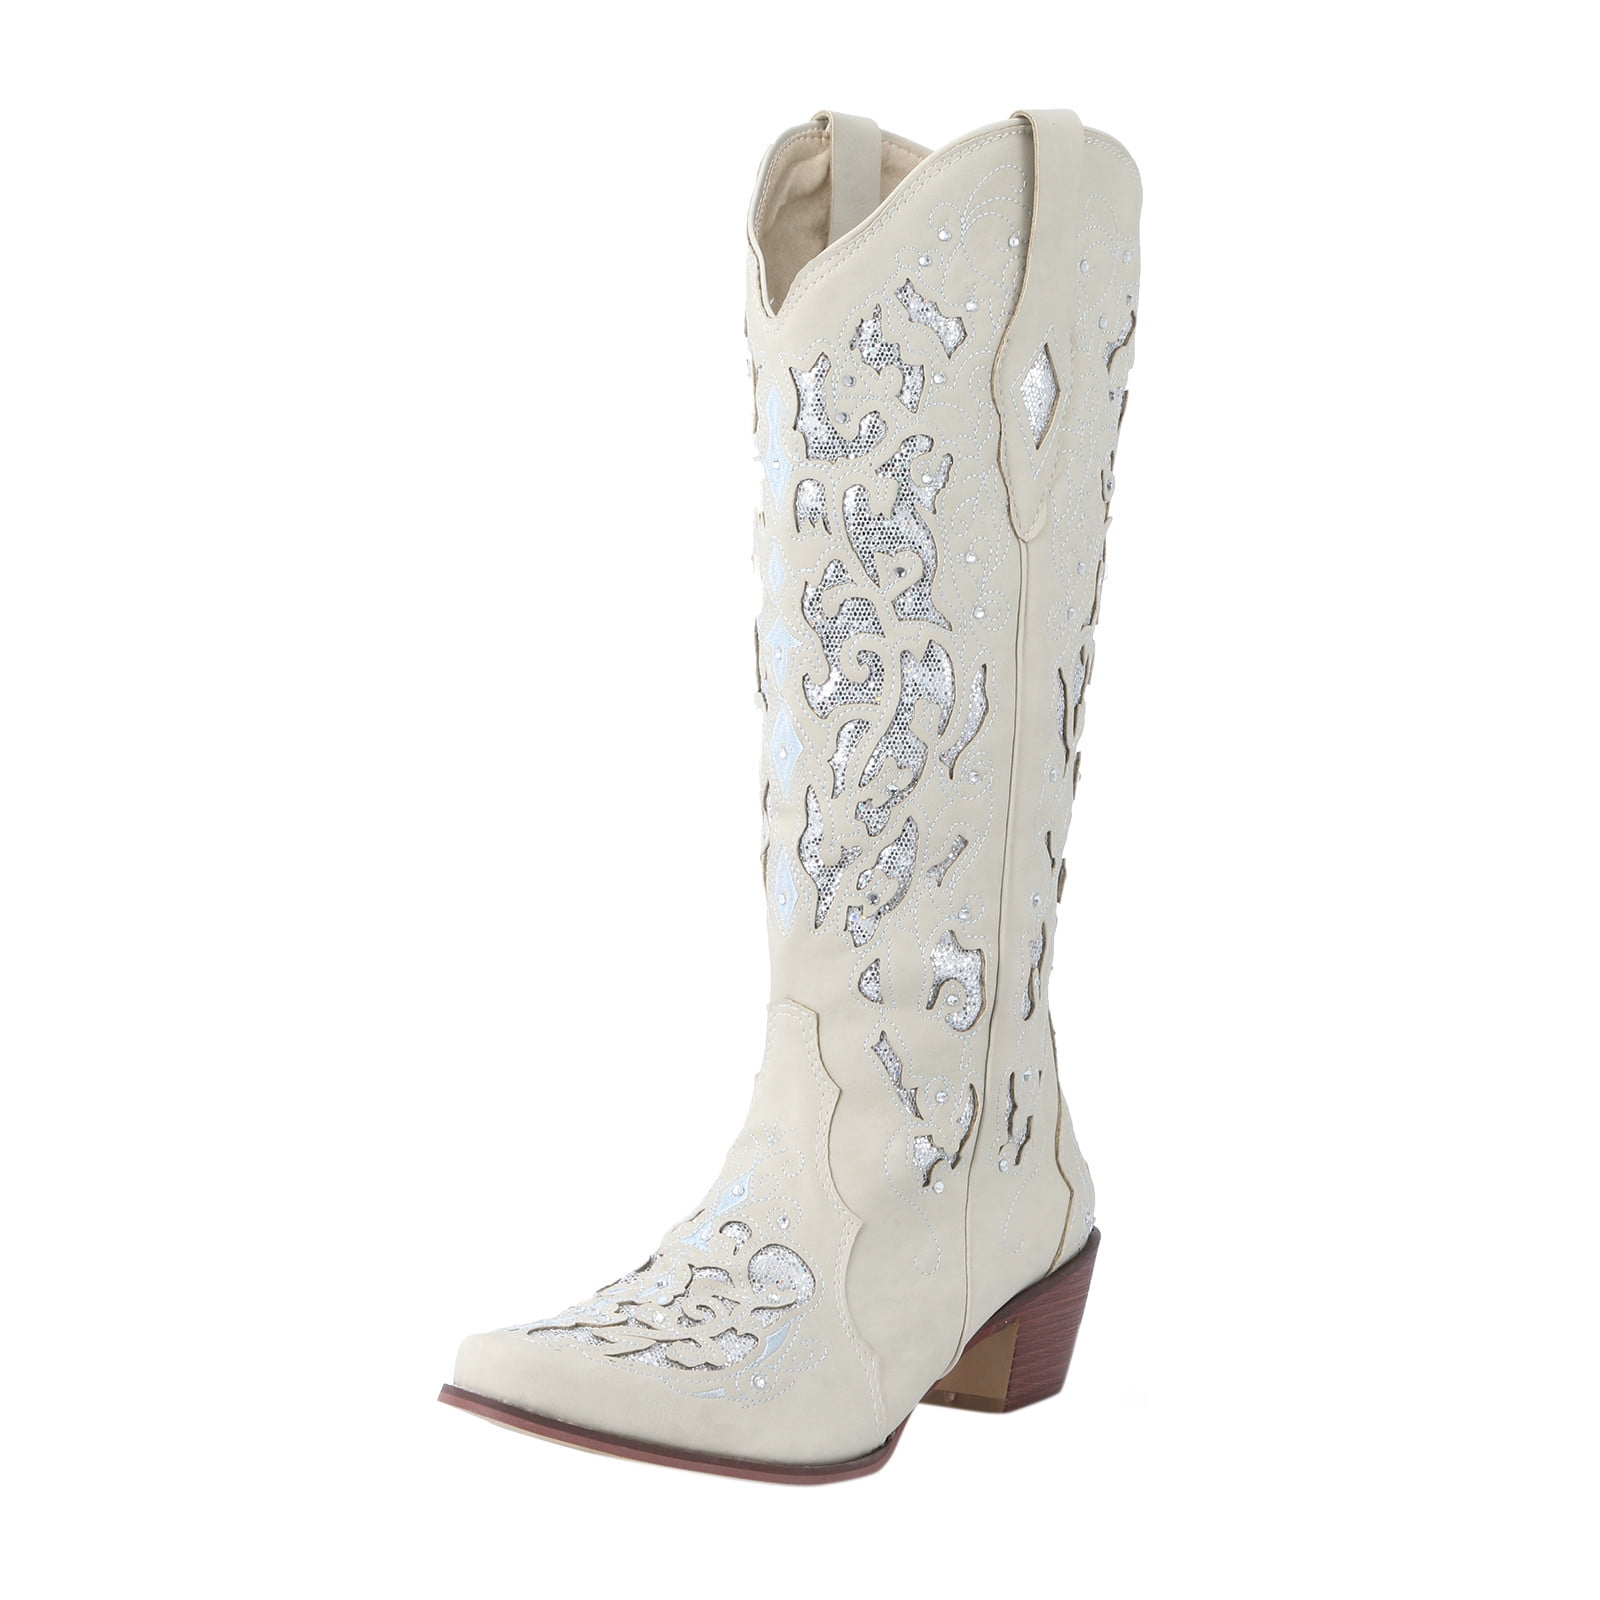 Cowboy Boots Women Chunky Heel Studded Rhinestone Embroidered Rodeo ...